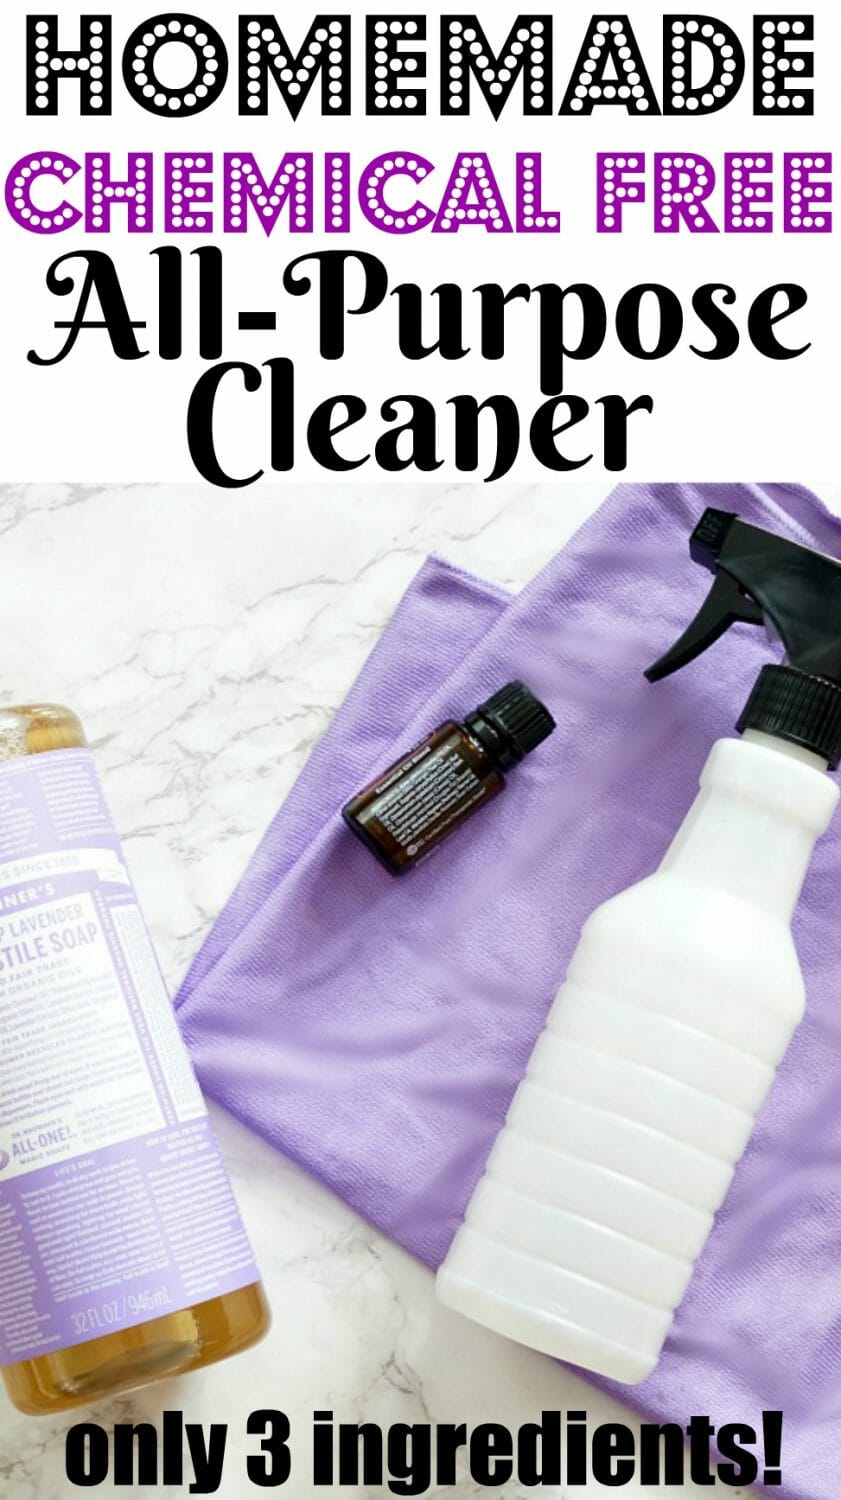 Quick Tip Tuesday: How to Make Homemade Chemical Free All-Purpose Cleaner with only 3 ingredients!